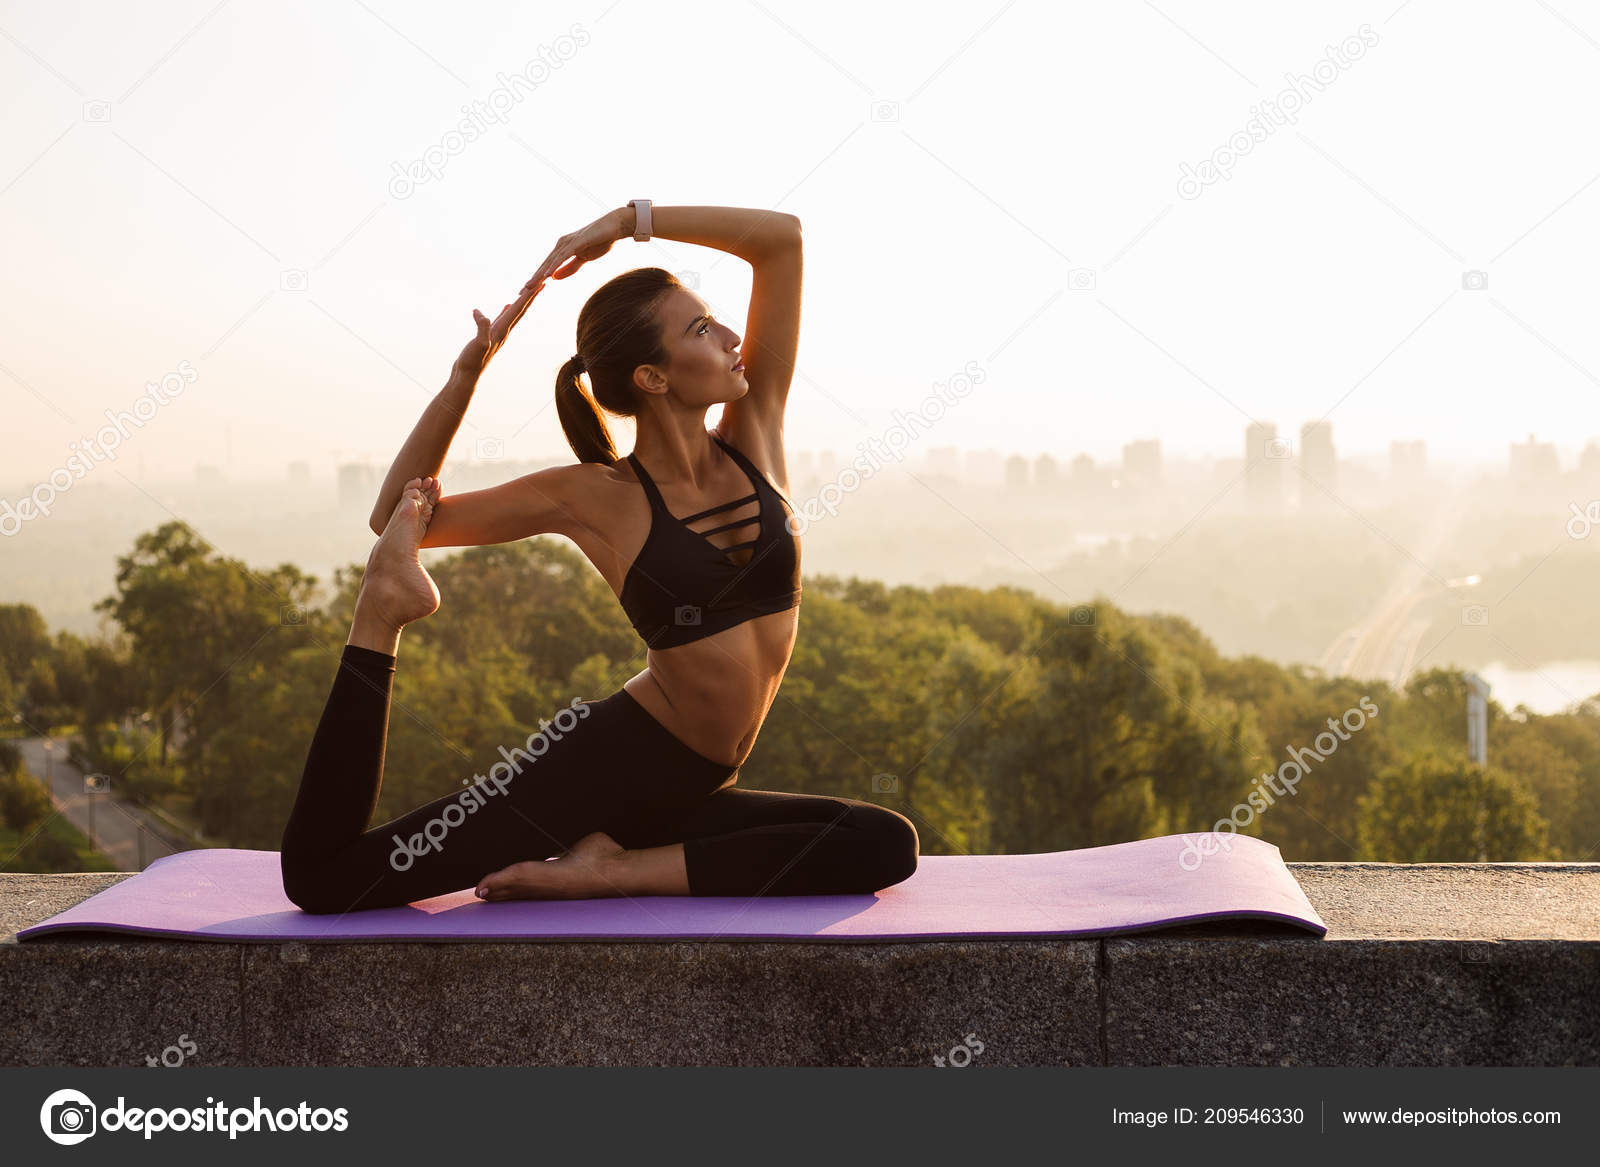 Yoga Beauty. Full Length Of Young Beautiful Fit Woman In